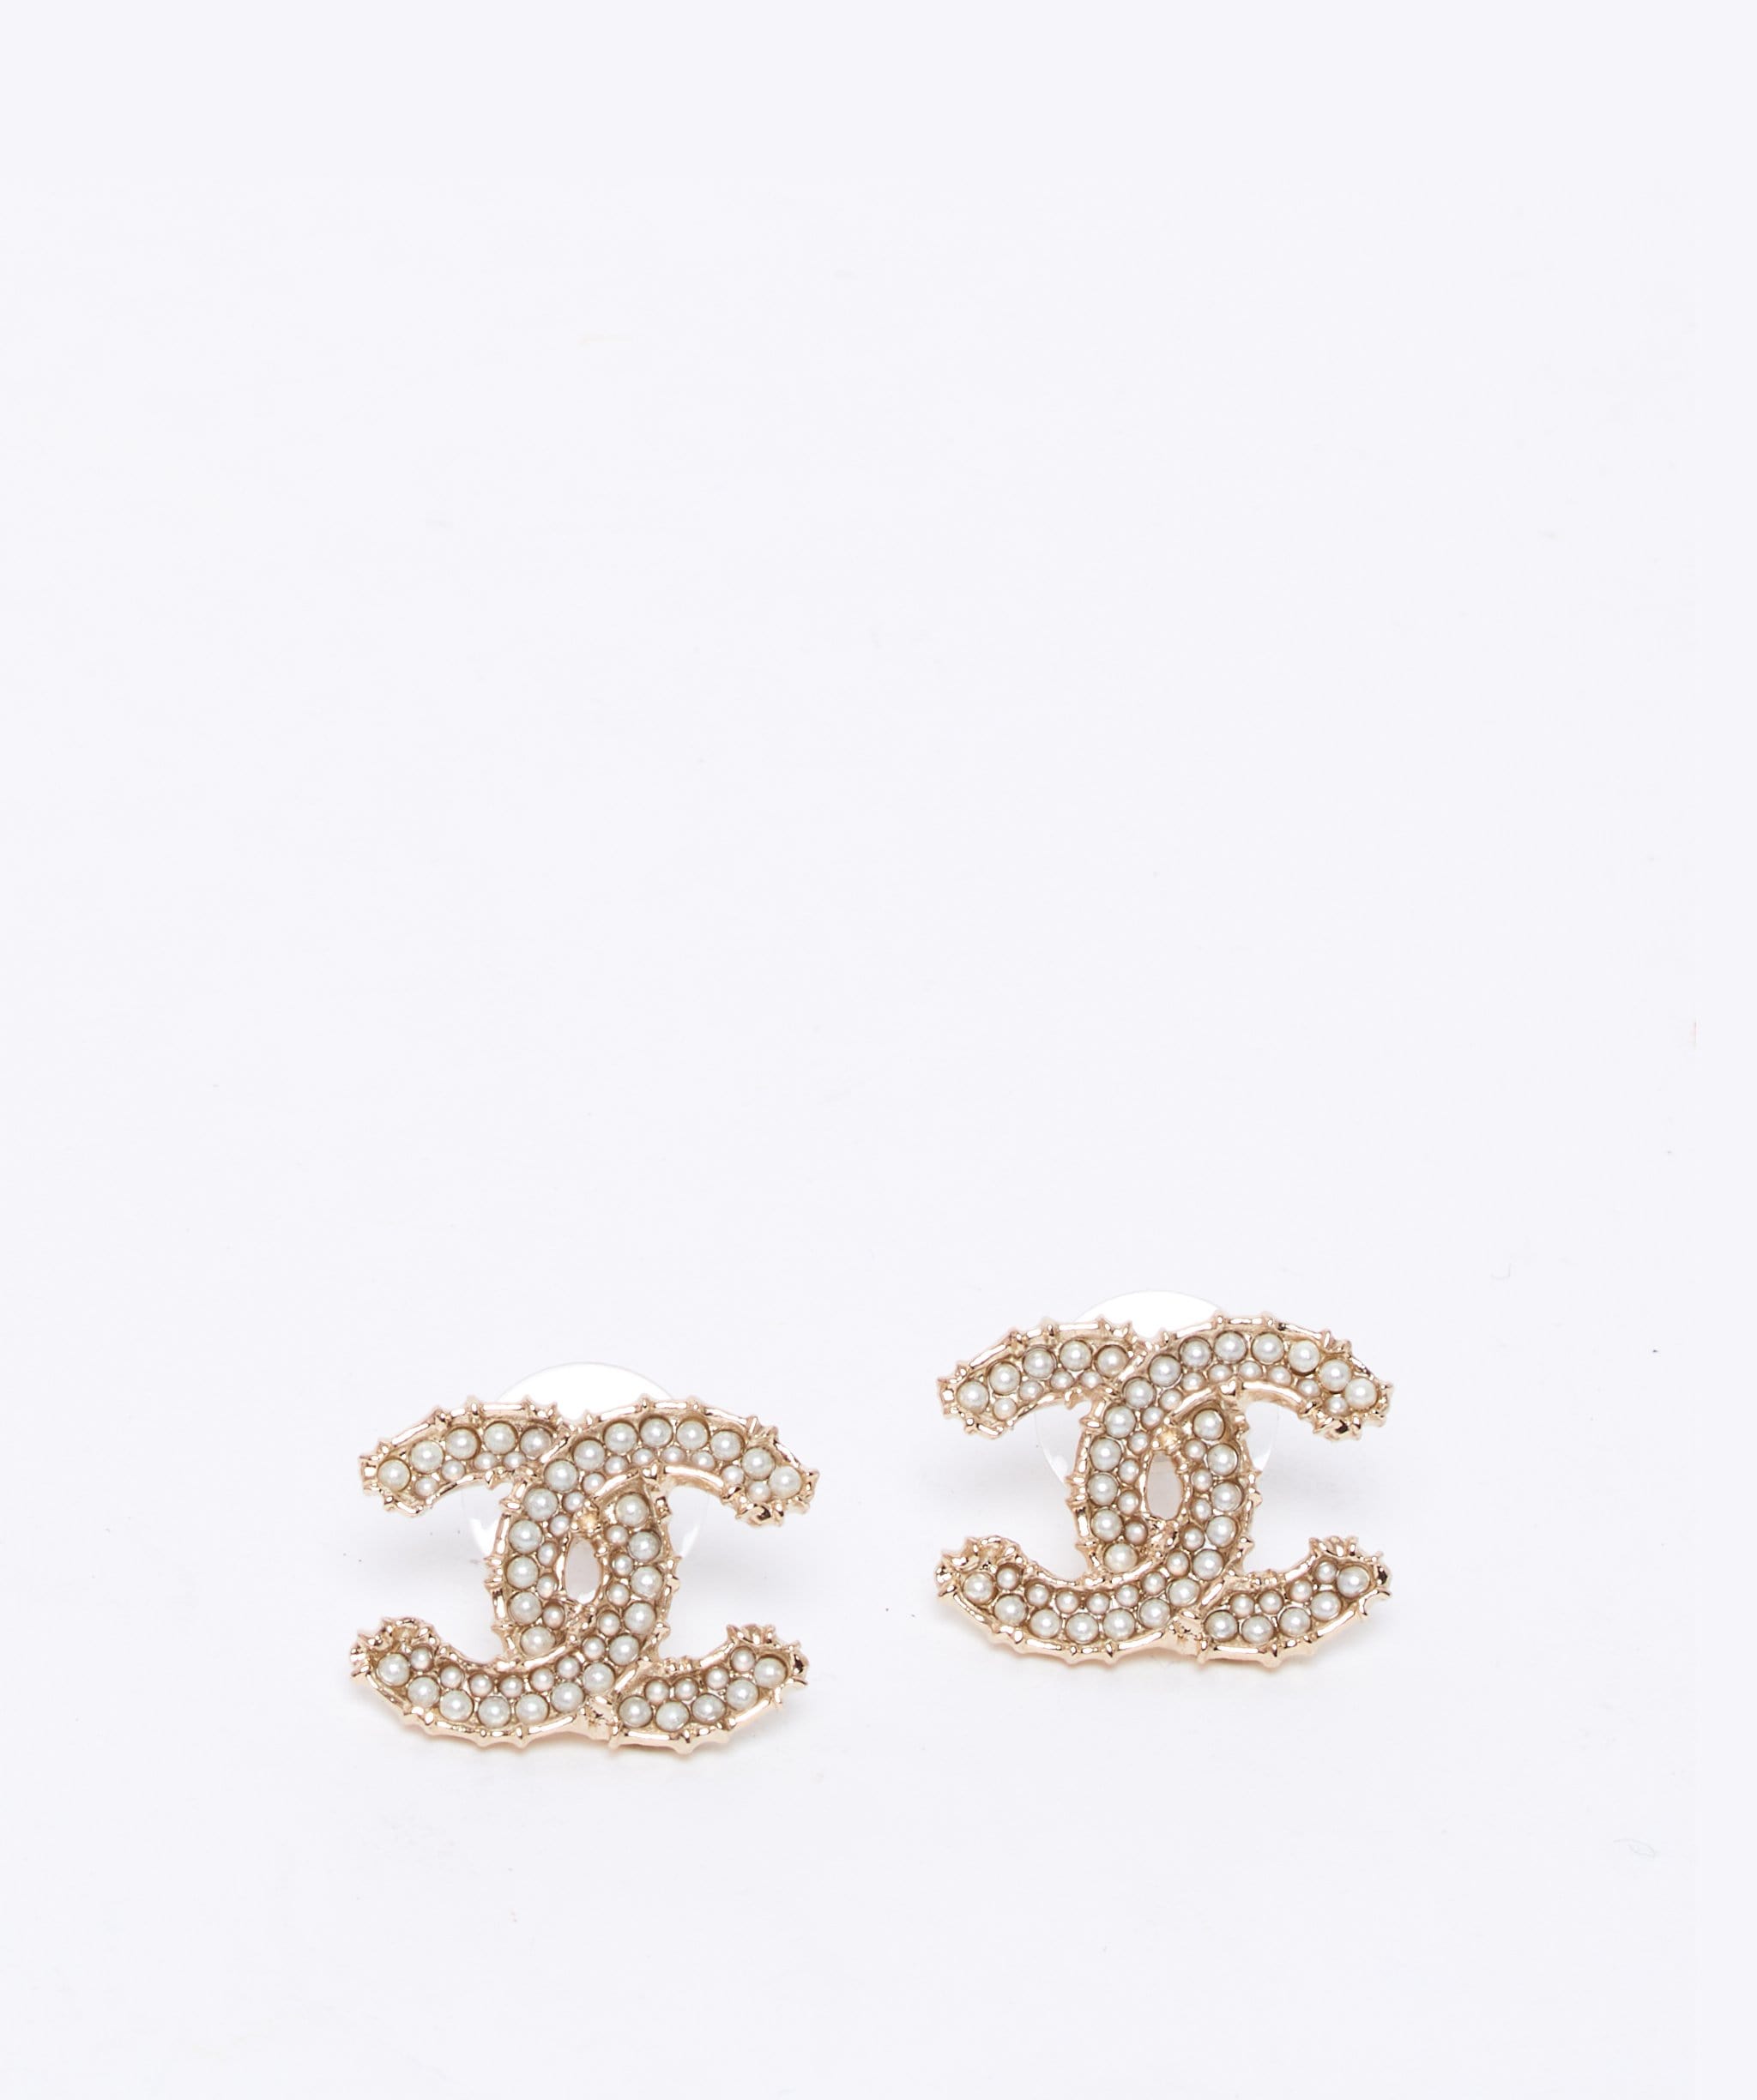 pearl chanel stud earrings - OFF-51% > Shipping free